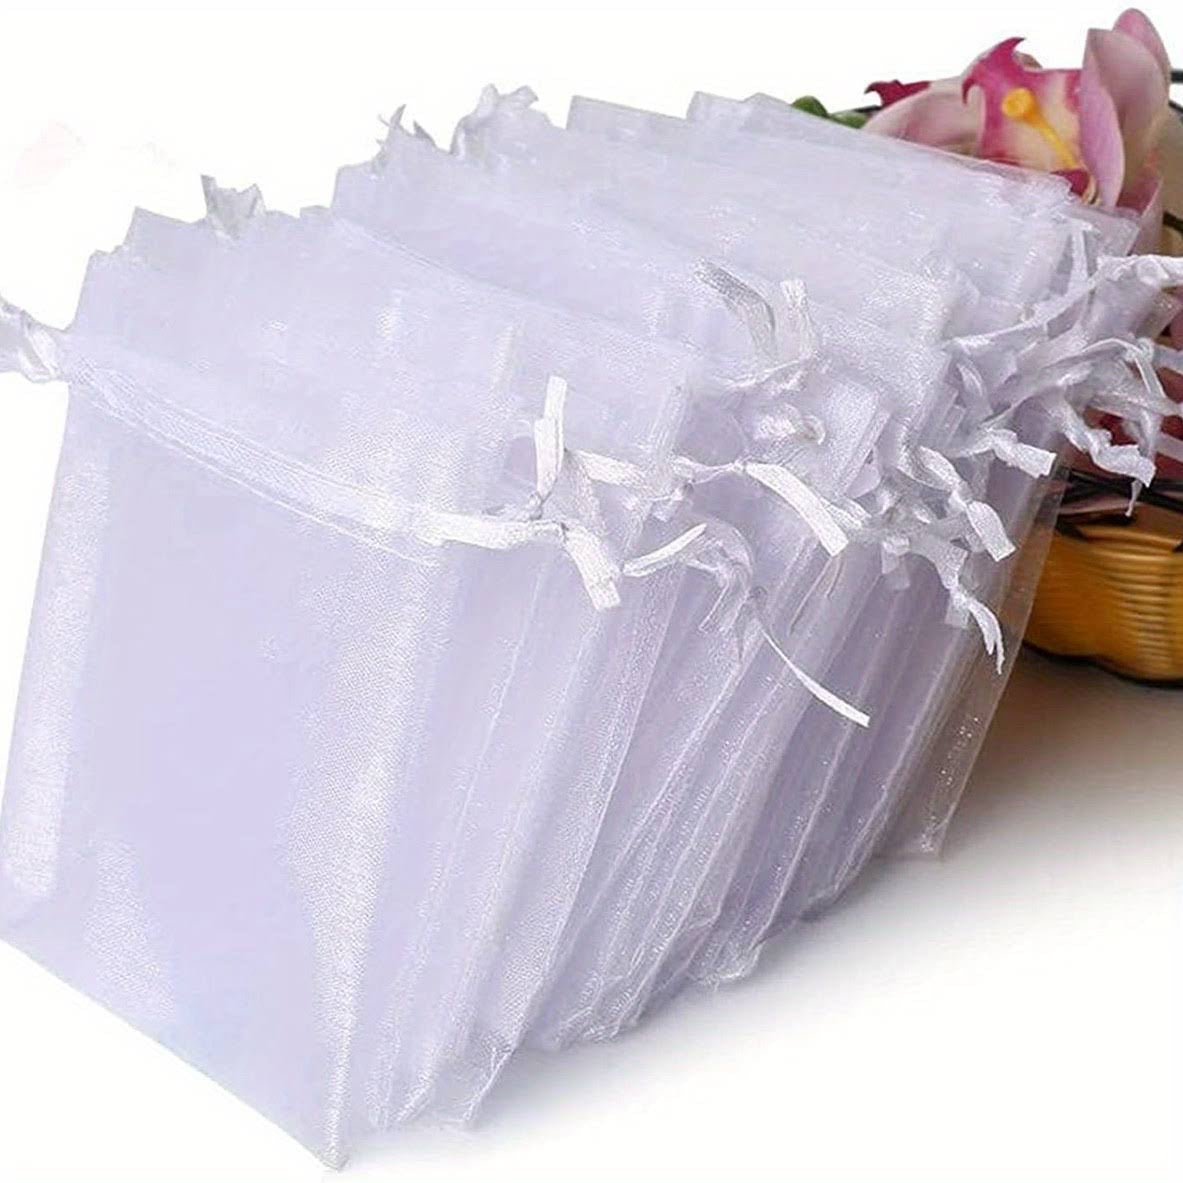 Mixed Crystal Confetti Bags